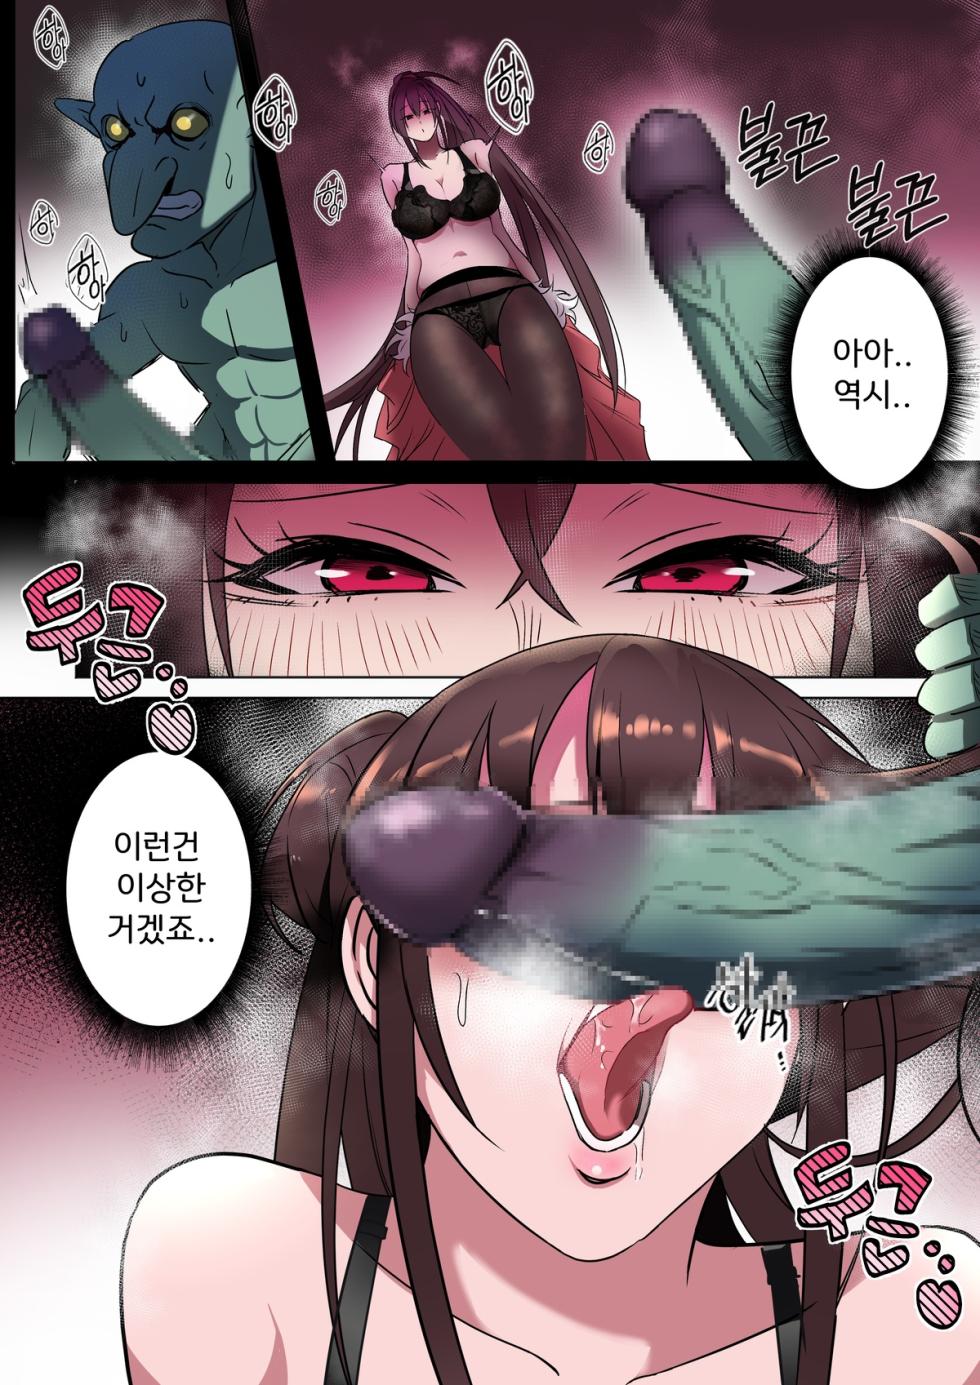 [Fanbox][マンガドッチ]슴부격차(Breasts Difference) - Page 11